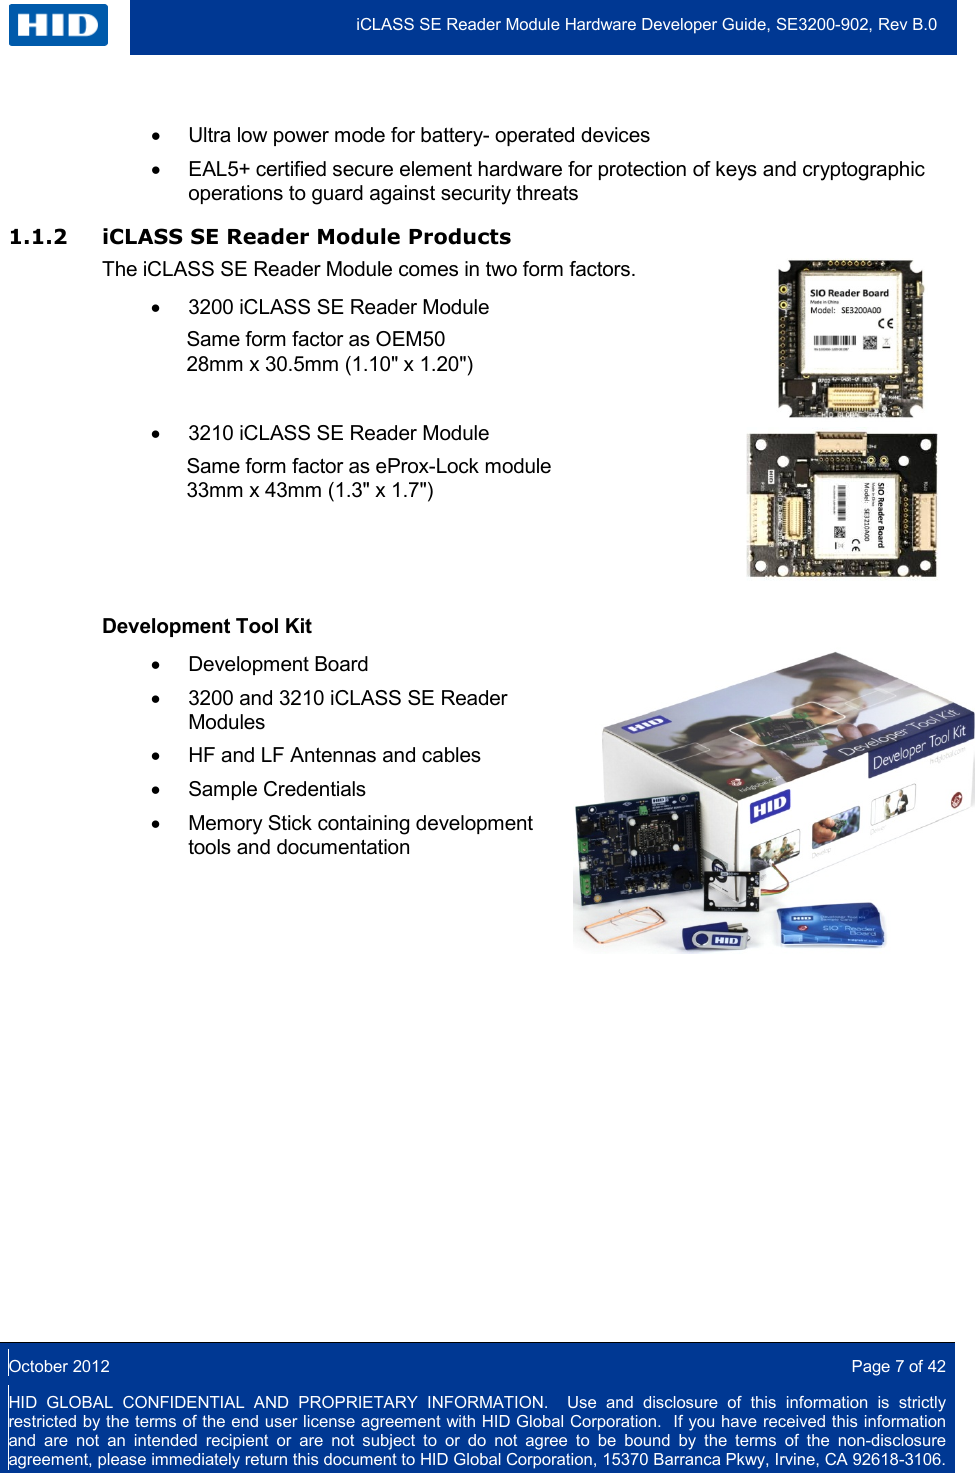  iCLASS SE Reader Module Hardware Developer Guide, SE3200-902, Rev B.0  October 2012  Page 7 of 42 HID GLOBAL CONFIDENTIAL AND PROPRIETARY INFORMATION.  Use and disclosure of this information is strictly restricted by the terms of the end user license agreement with HID Global Corporation.  If you have received this information and are not an intended recipient or are not subject to or do not agree to be bound by the terms of the non-disclosure agreement, please immediately return this document to HID Global Corporation, 15370 Barranca Pkwy, Irvine, CA 92618-3106.  • Ultra low power mode for battery- operated devices • EAL5+ certified secure element hardware for protection of keys and cryptographic operations to guard against security threats 1.1.2 iCLASS SE Reader Module Products The iCLASS SE Reader Module comes in two form factors. • 3200 iCLASS SE Reader Module Same form factor as OEM50 28mm x 30.5mm (1.10&quot; x 1.20&quot;)   • 3210 iCLASS SE Reader Module Same form factor as eProx-Lock module 33mm x 43mm (1.3&quot; x 1.7&quot;)      Development Tool Kit   • Development Board  • 3200 and 3210 iCLASS SE Reader Modules • HF and LF Antennas and cables  • Sample Credentials  • Memory Stick containing development tools and documentation       